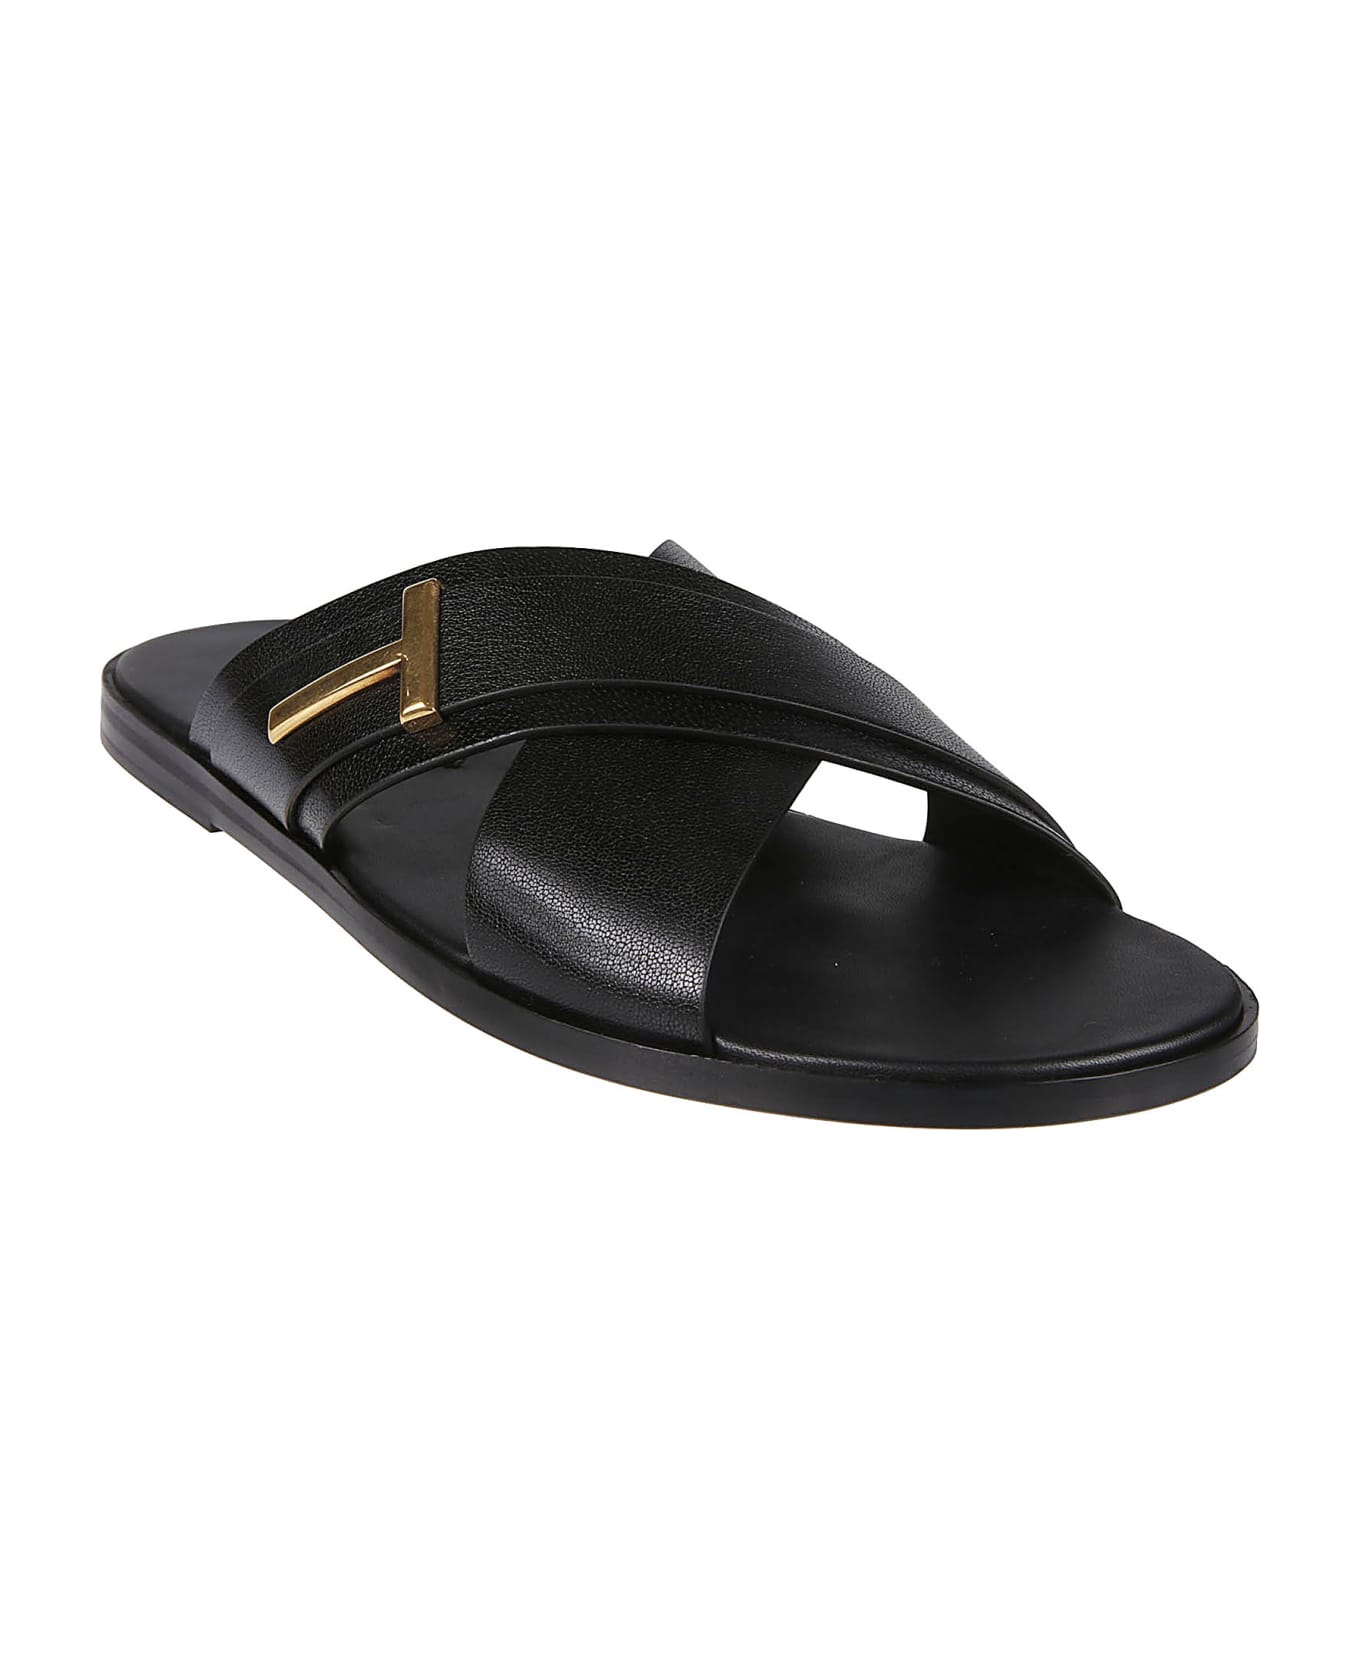 Tom Ford Leather Sandals - Black その他各種シューズ